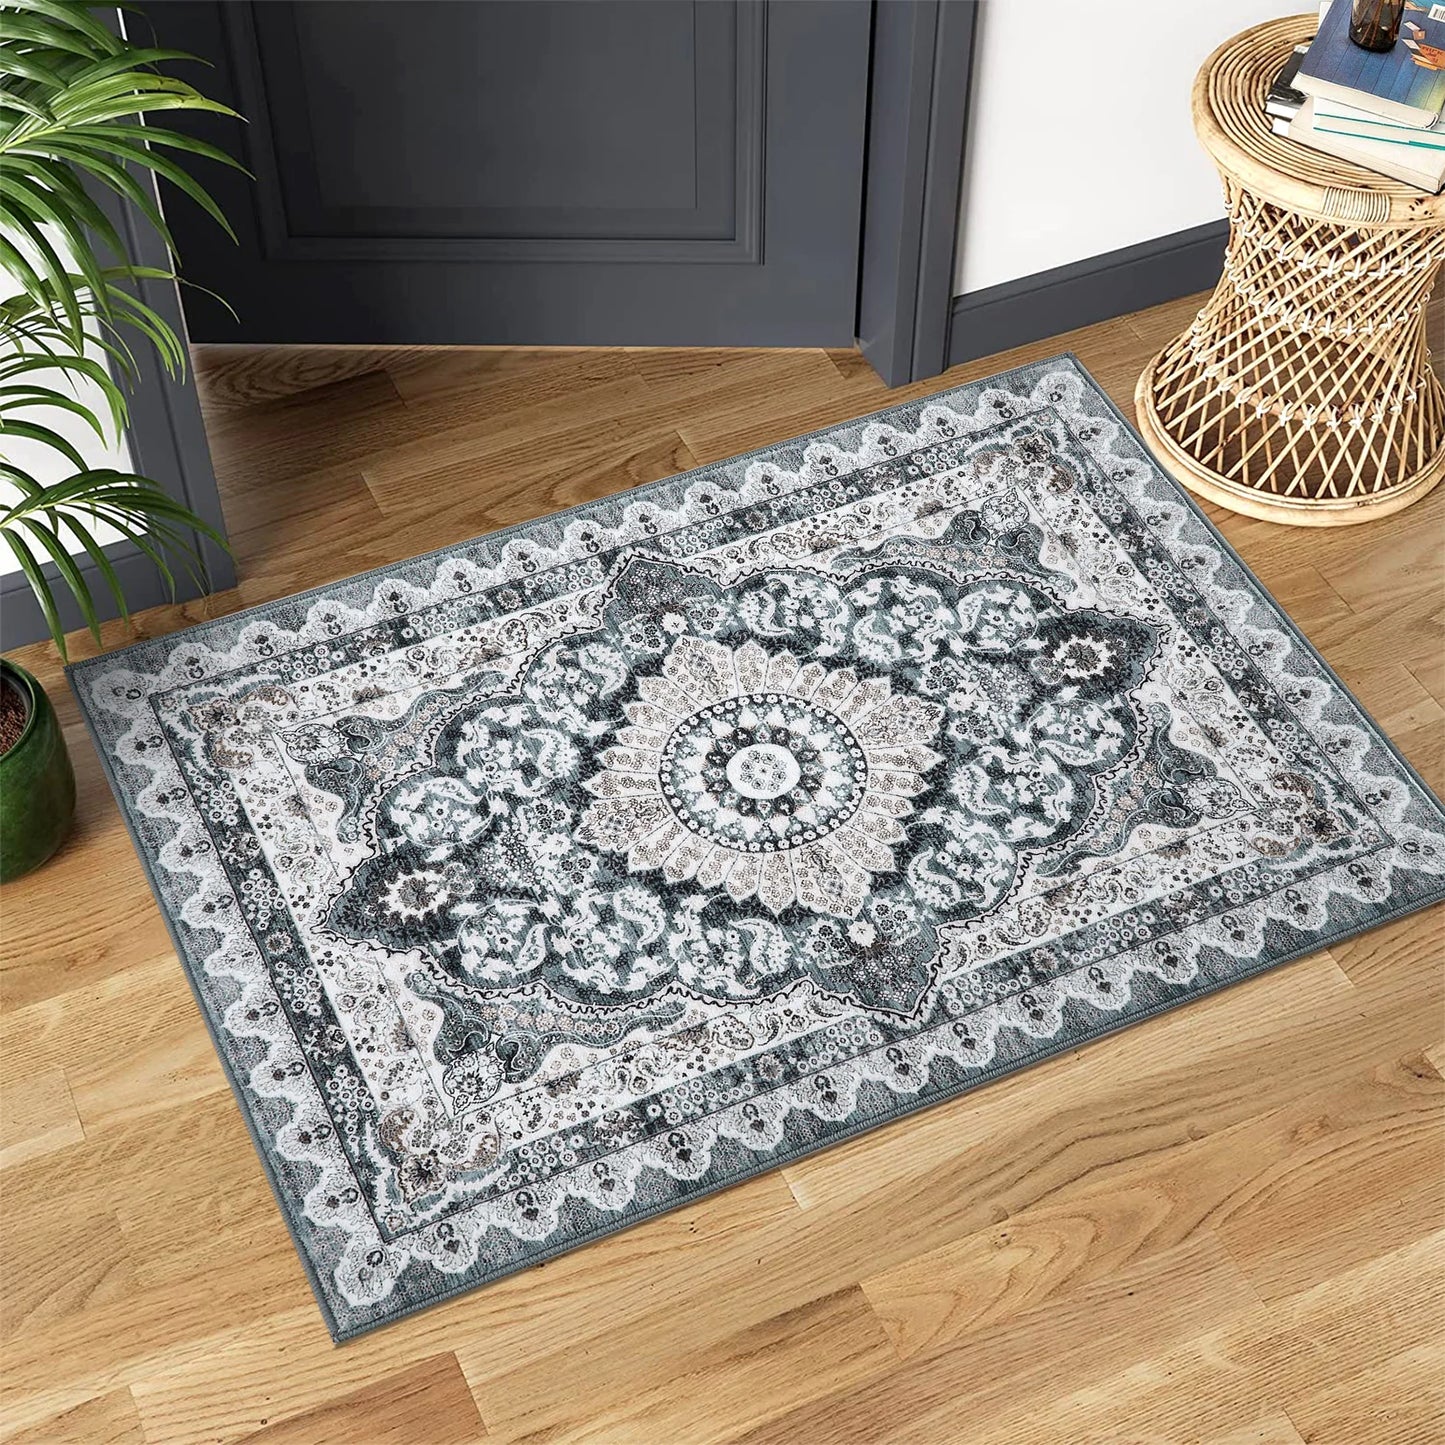 Glowsol Boho Rugs Washable Non-Slip Area Rug Stain Resistant Carpet